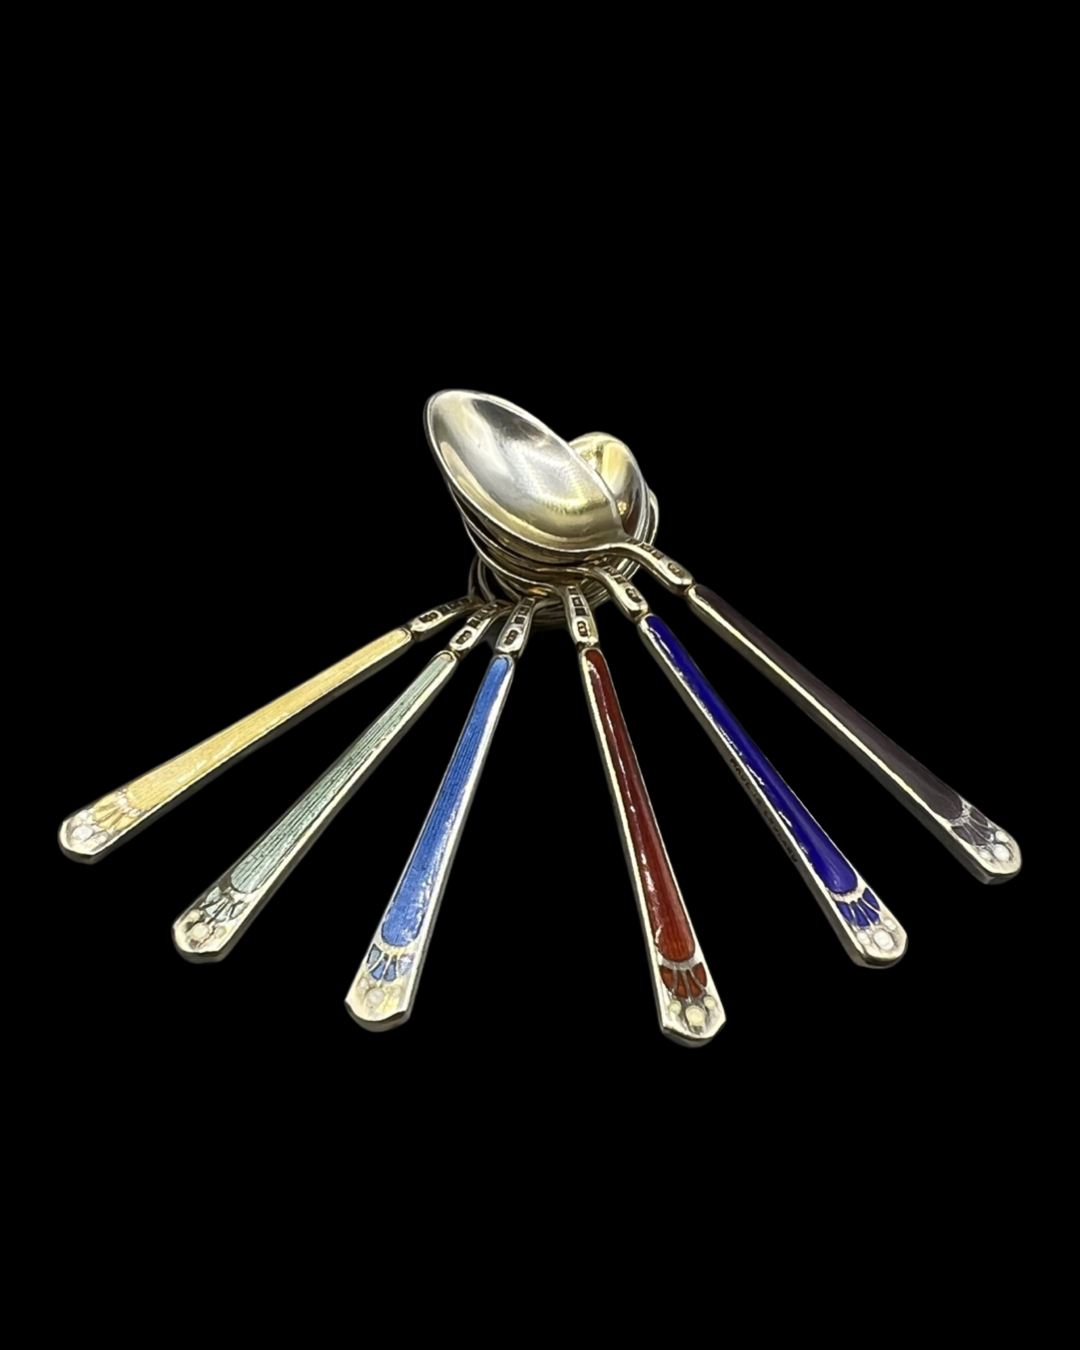 Vintage Harrods 1955 Hallmarked Sterling Silver and Enamel Spoon Set, in good condition with - Image 2 of 3